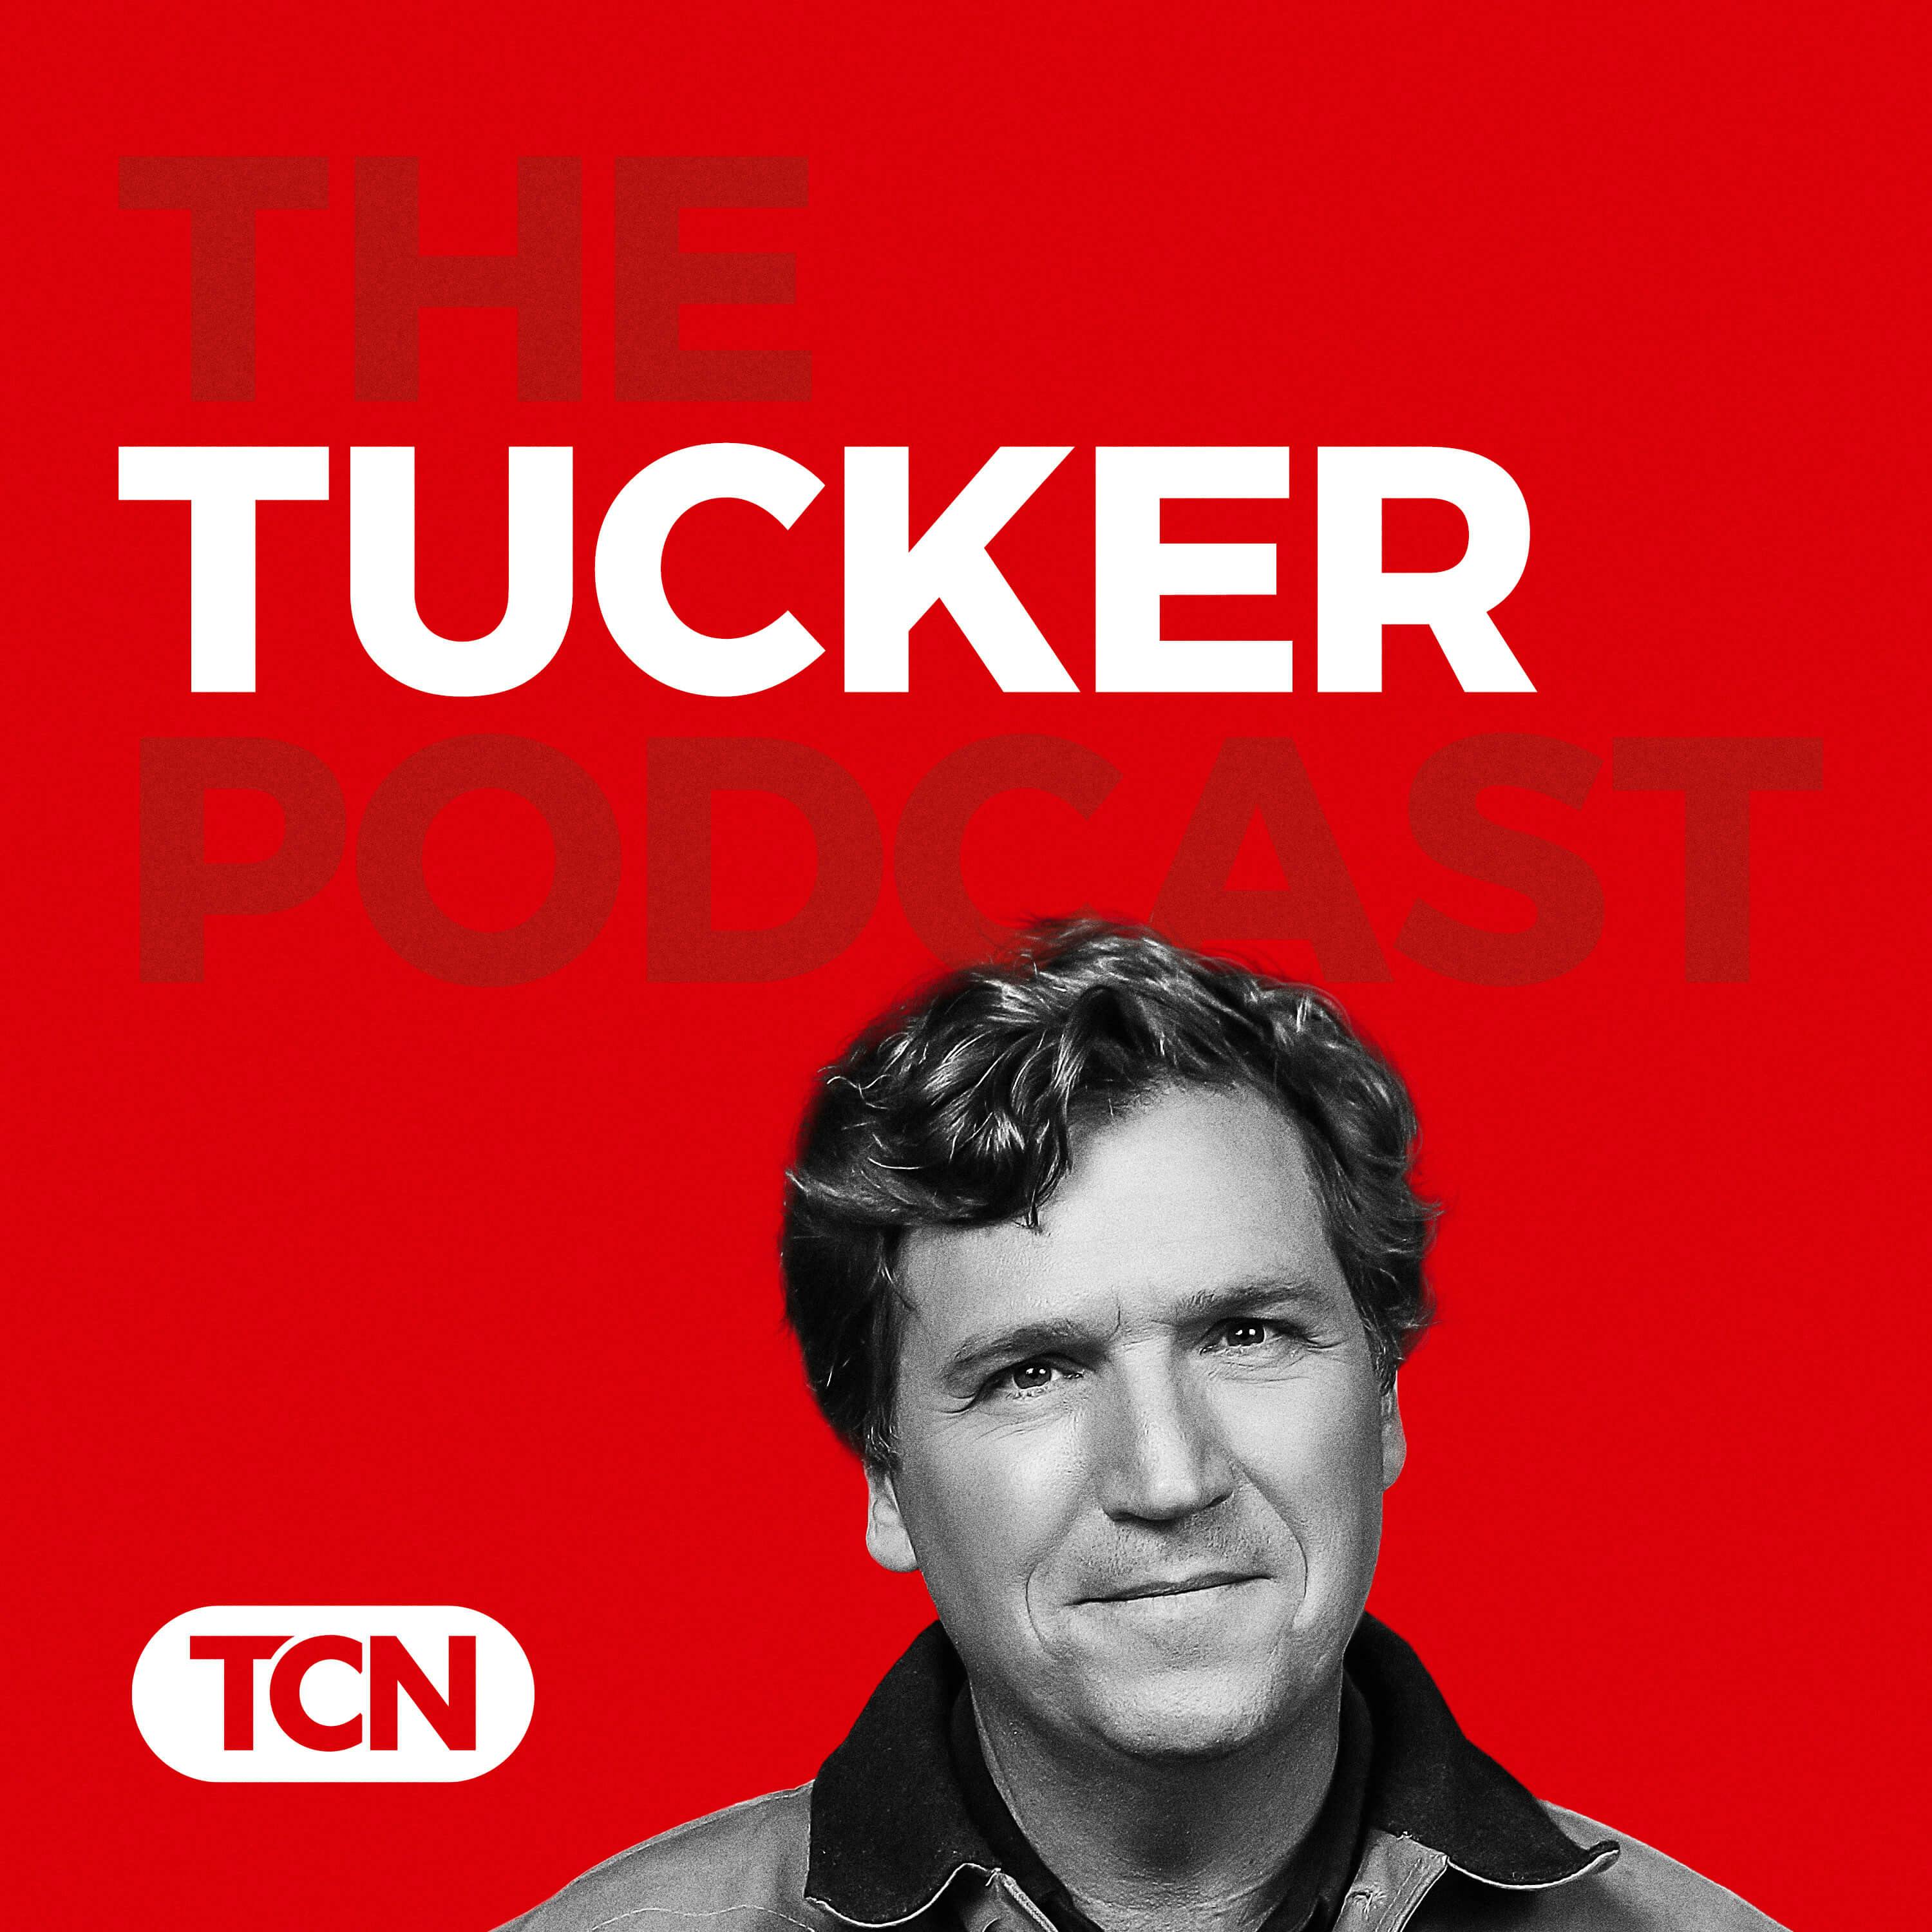 Tucker speaks at the RiskOn360! Global Success Conference by Tucker Carlson Network